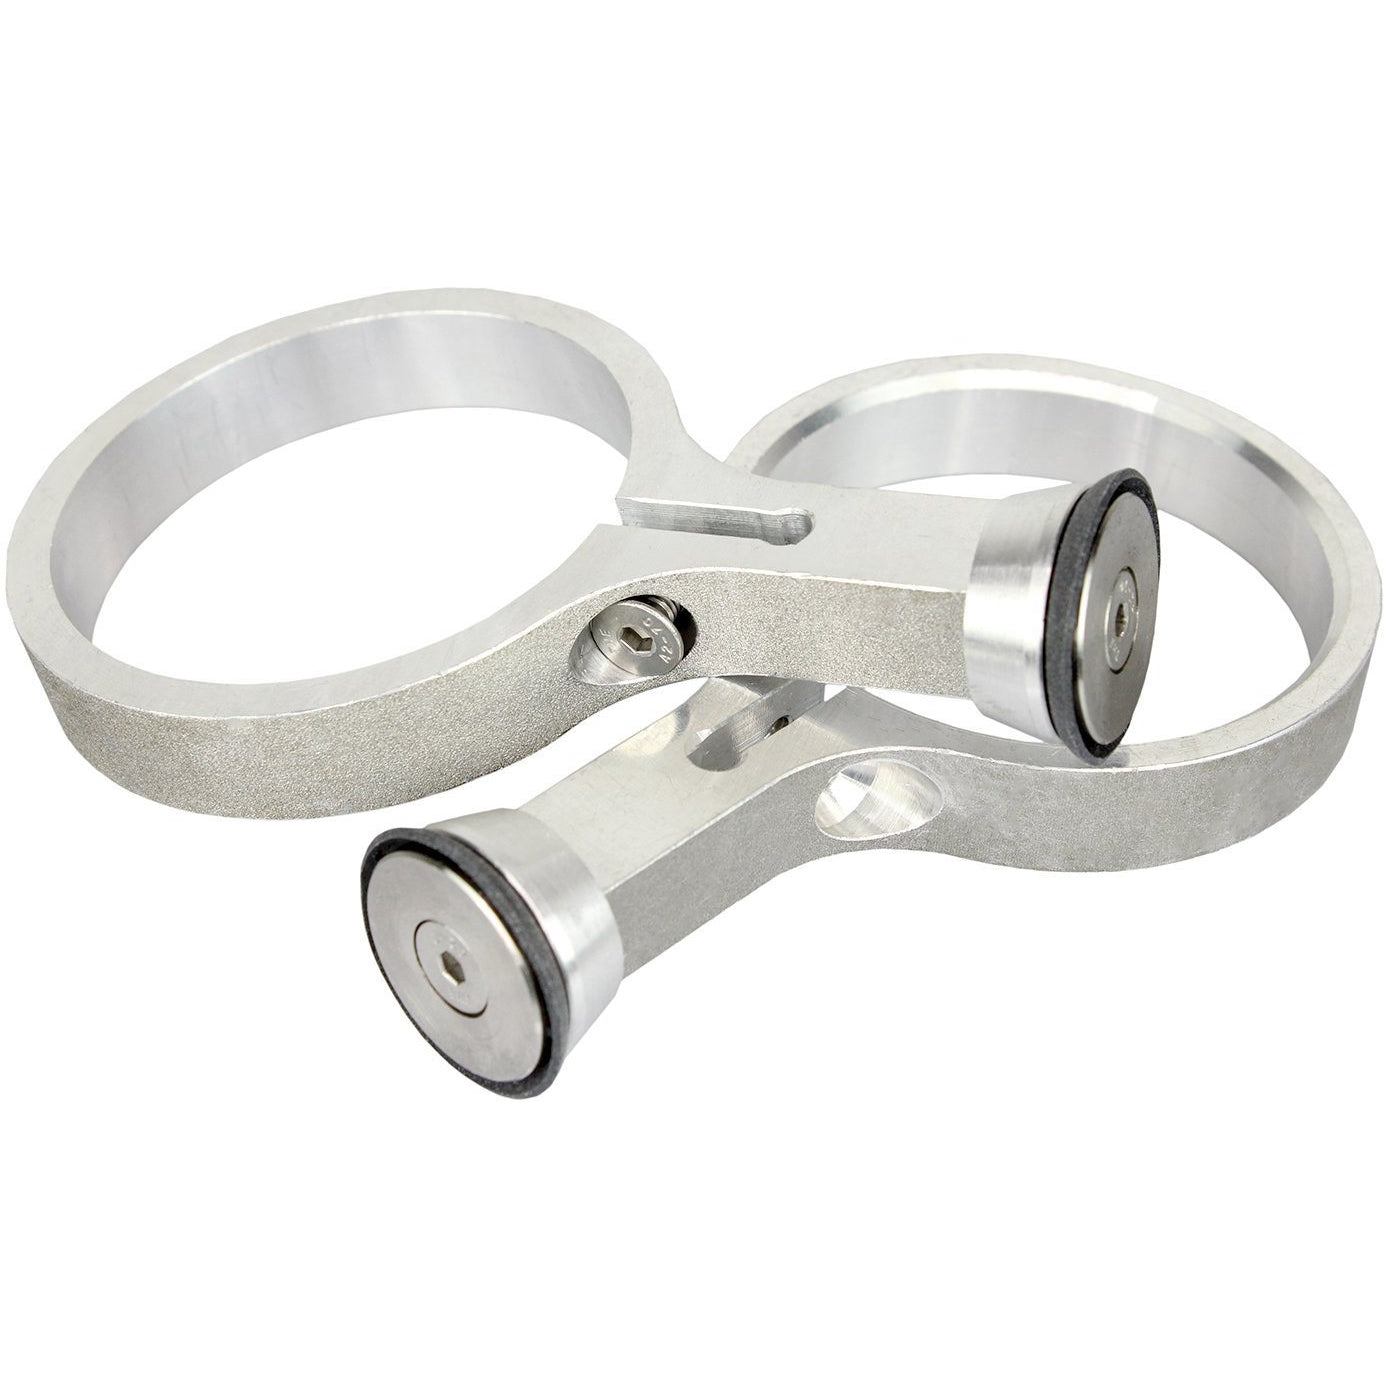 CMEP, CMEP-OL Connecting Rods - 2 Pack